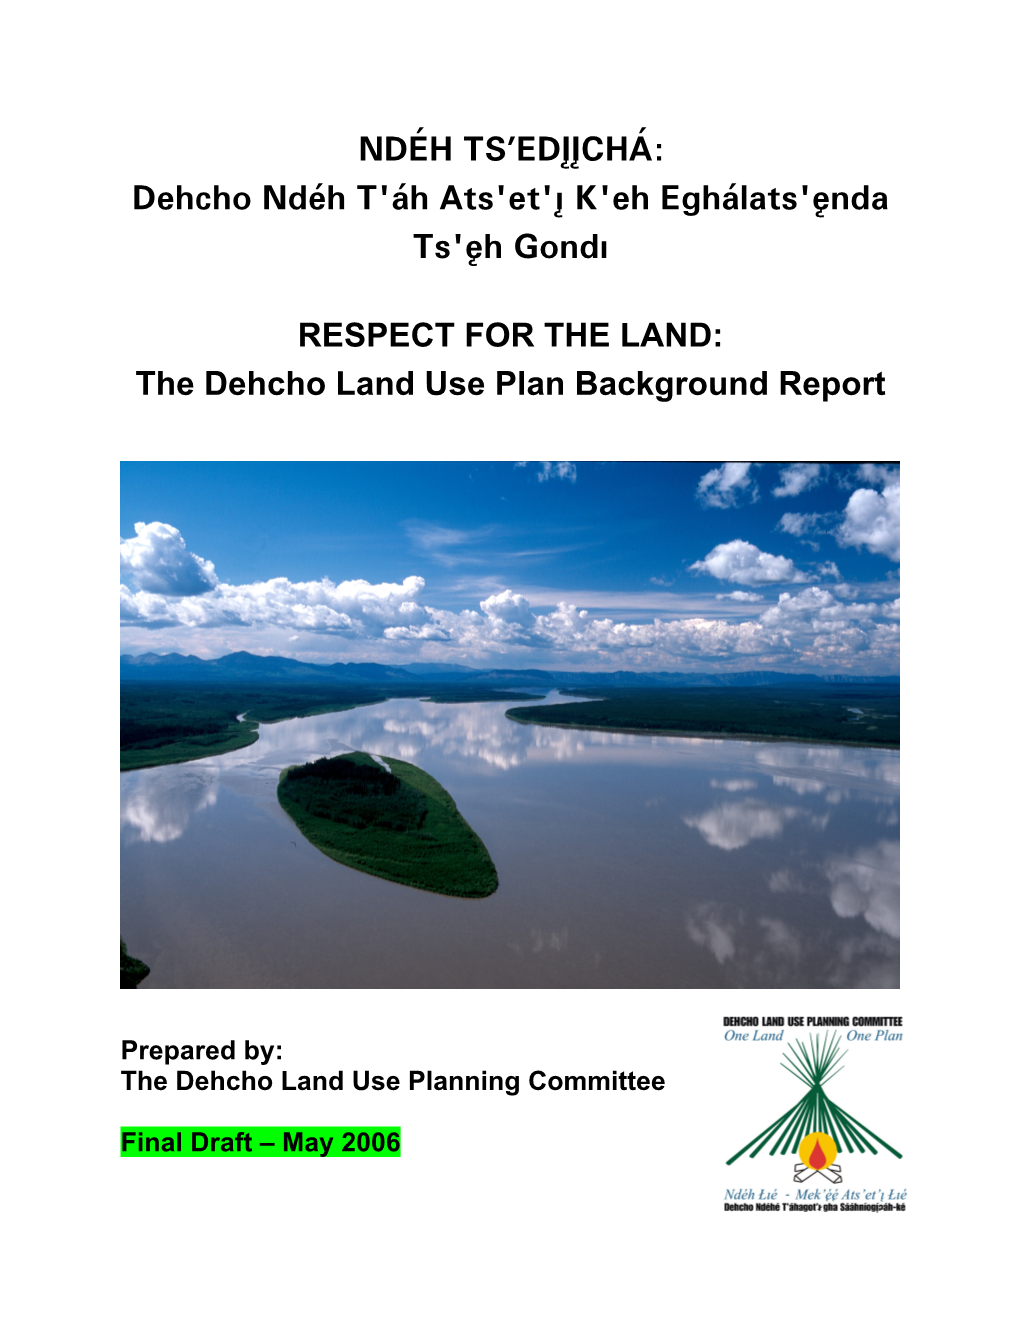 The Dehcho Land Use Plan Background Report